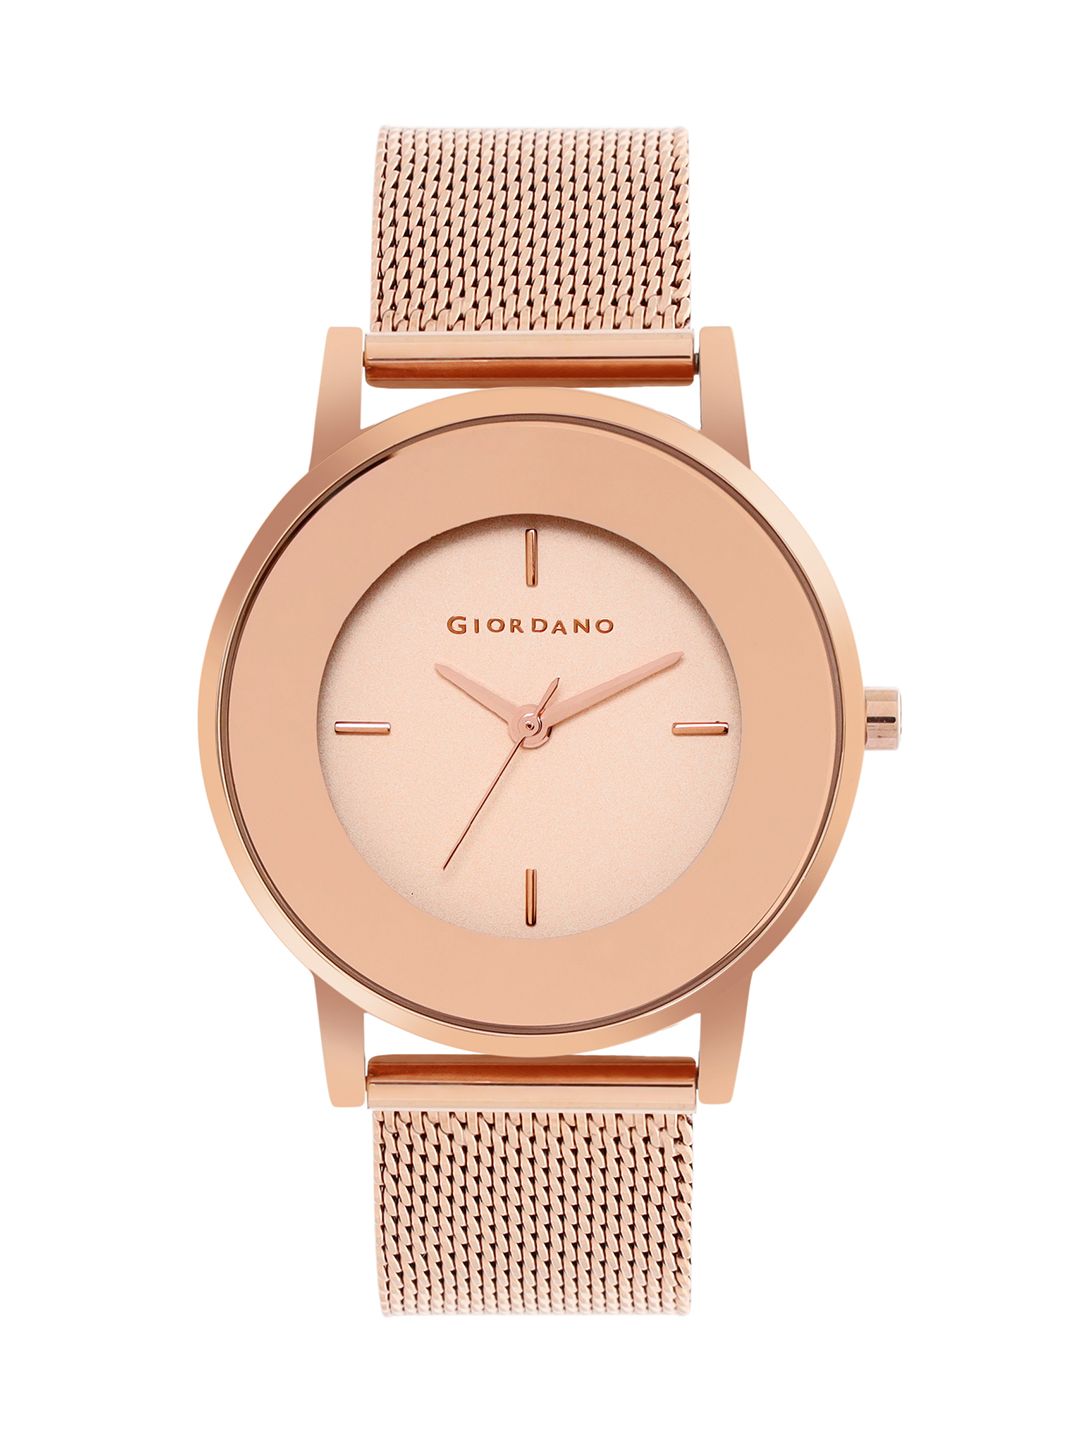 GIORDANO Women Rose Gold-Toned Mirrored Analogue Watch FA2052-55 Price in India